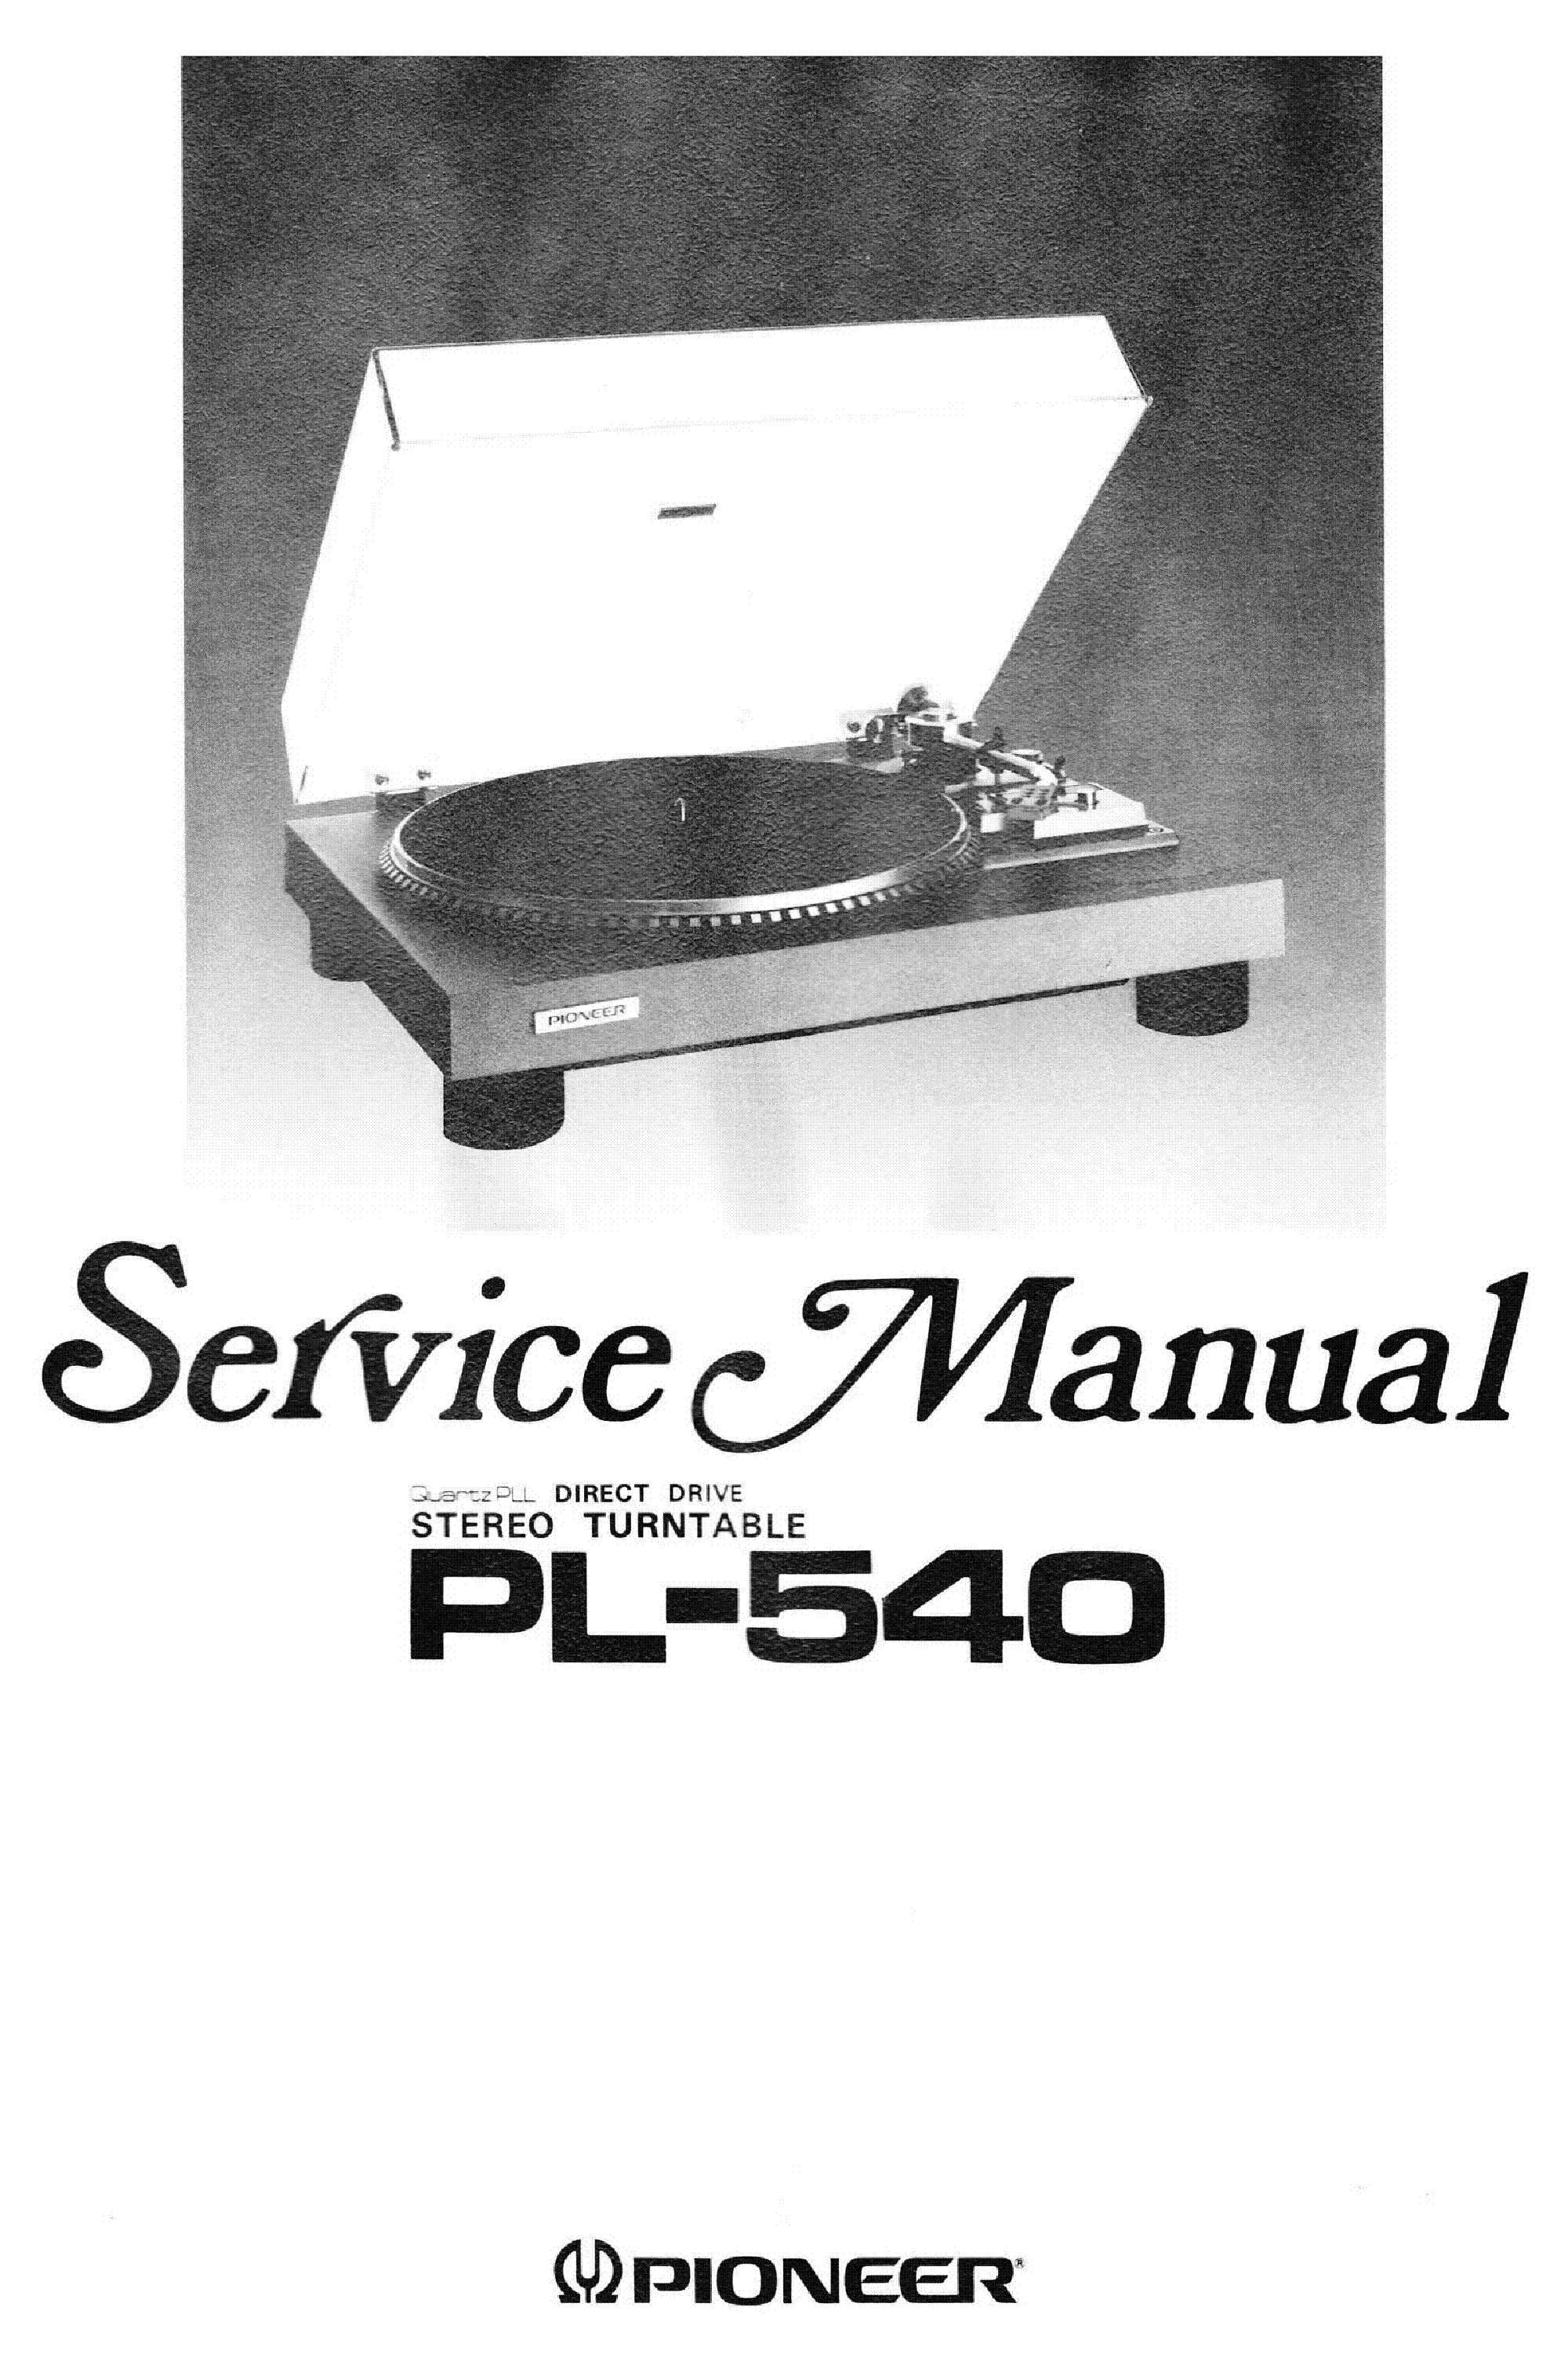 PIONEER PL-540 STEREO TURNTABLE service manual (1st page)